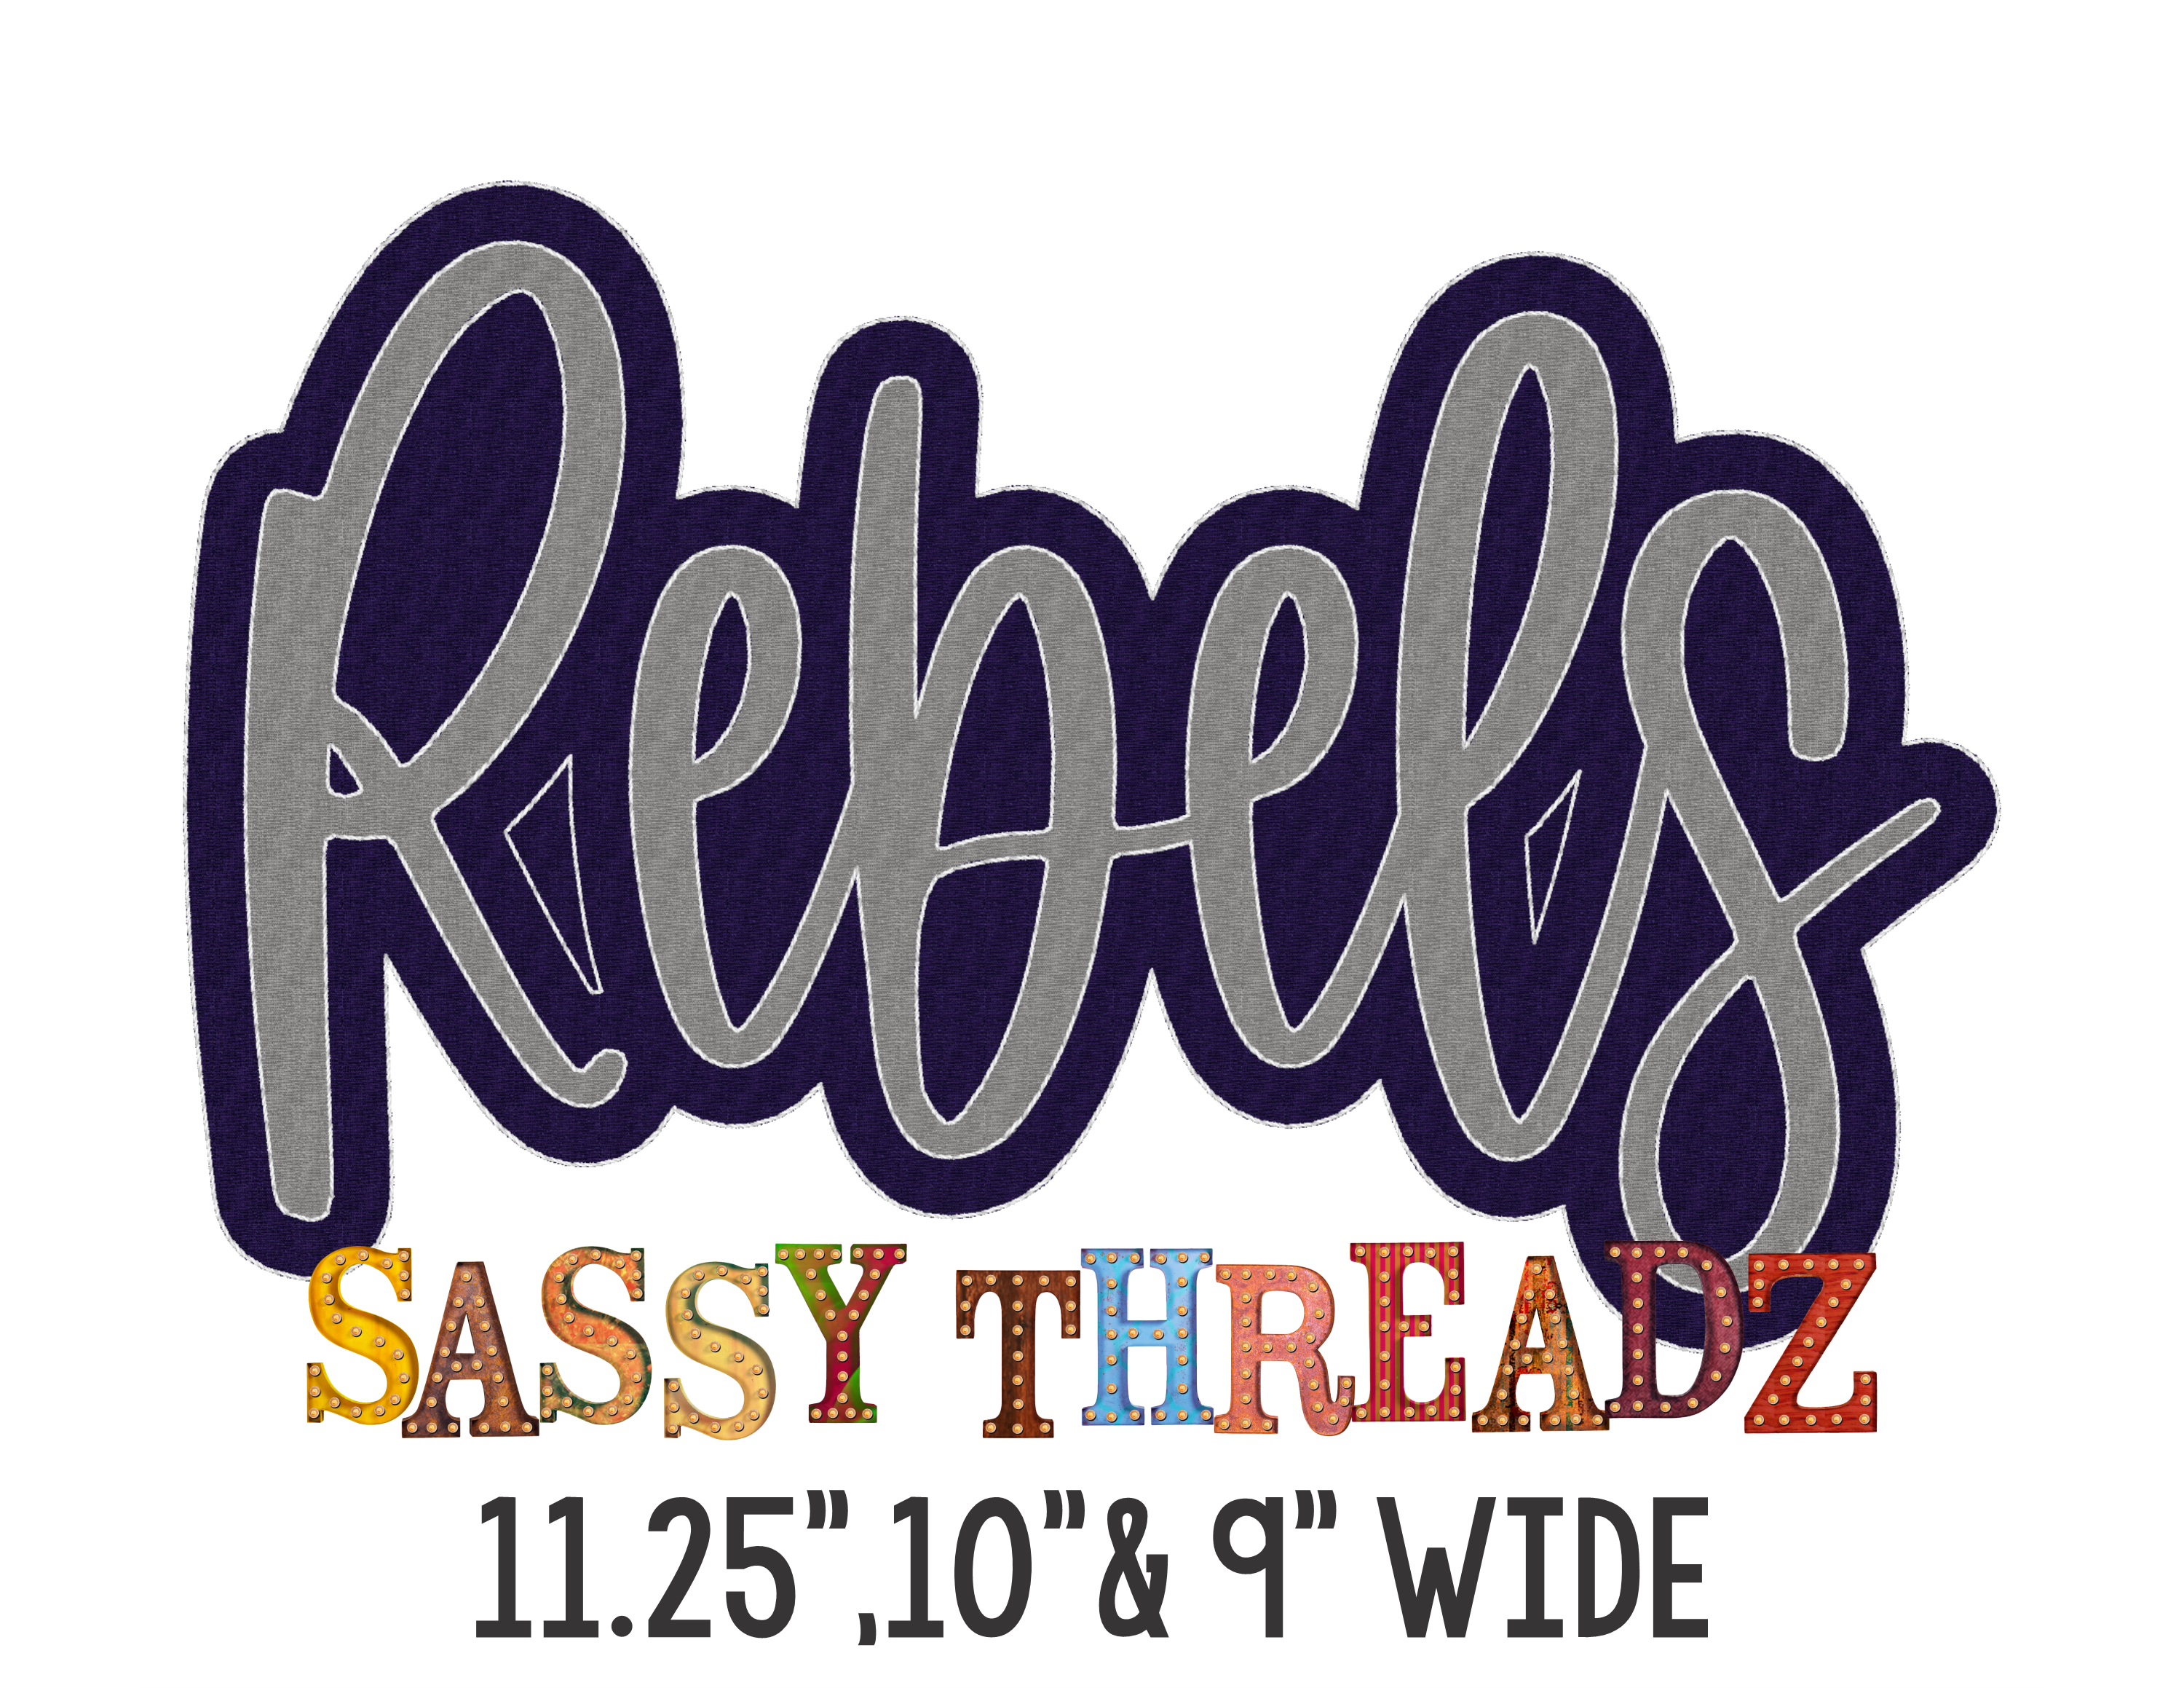 Rebels Double Stacked Script Embroidery Download - Sassy Threadz